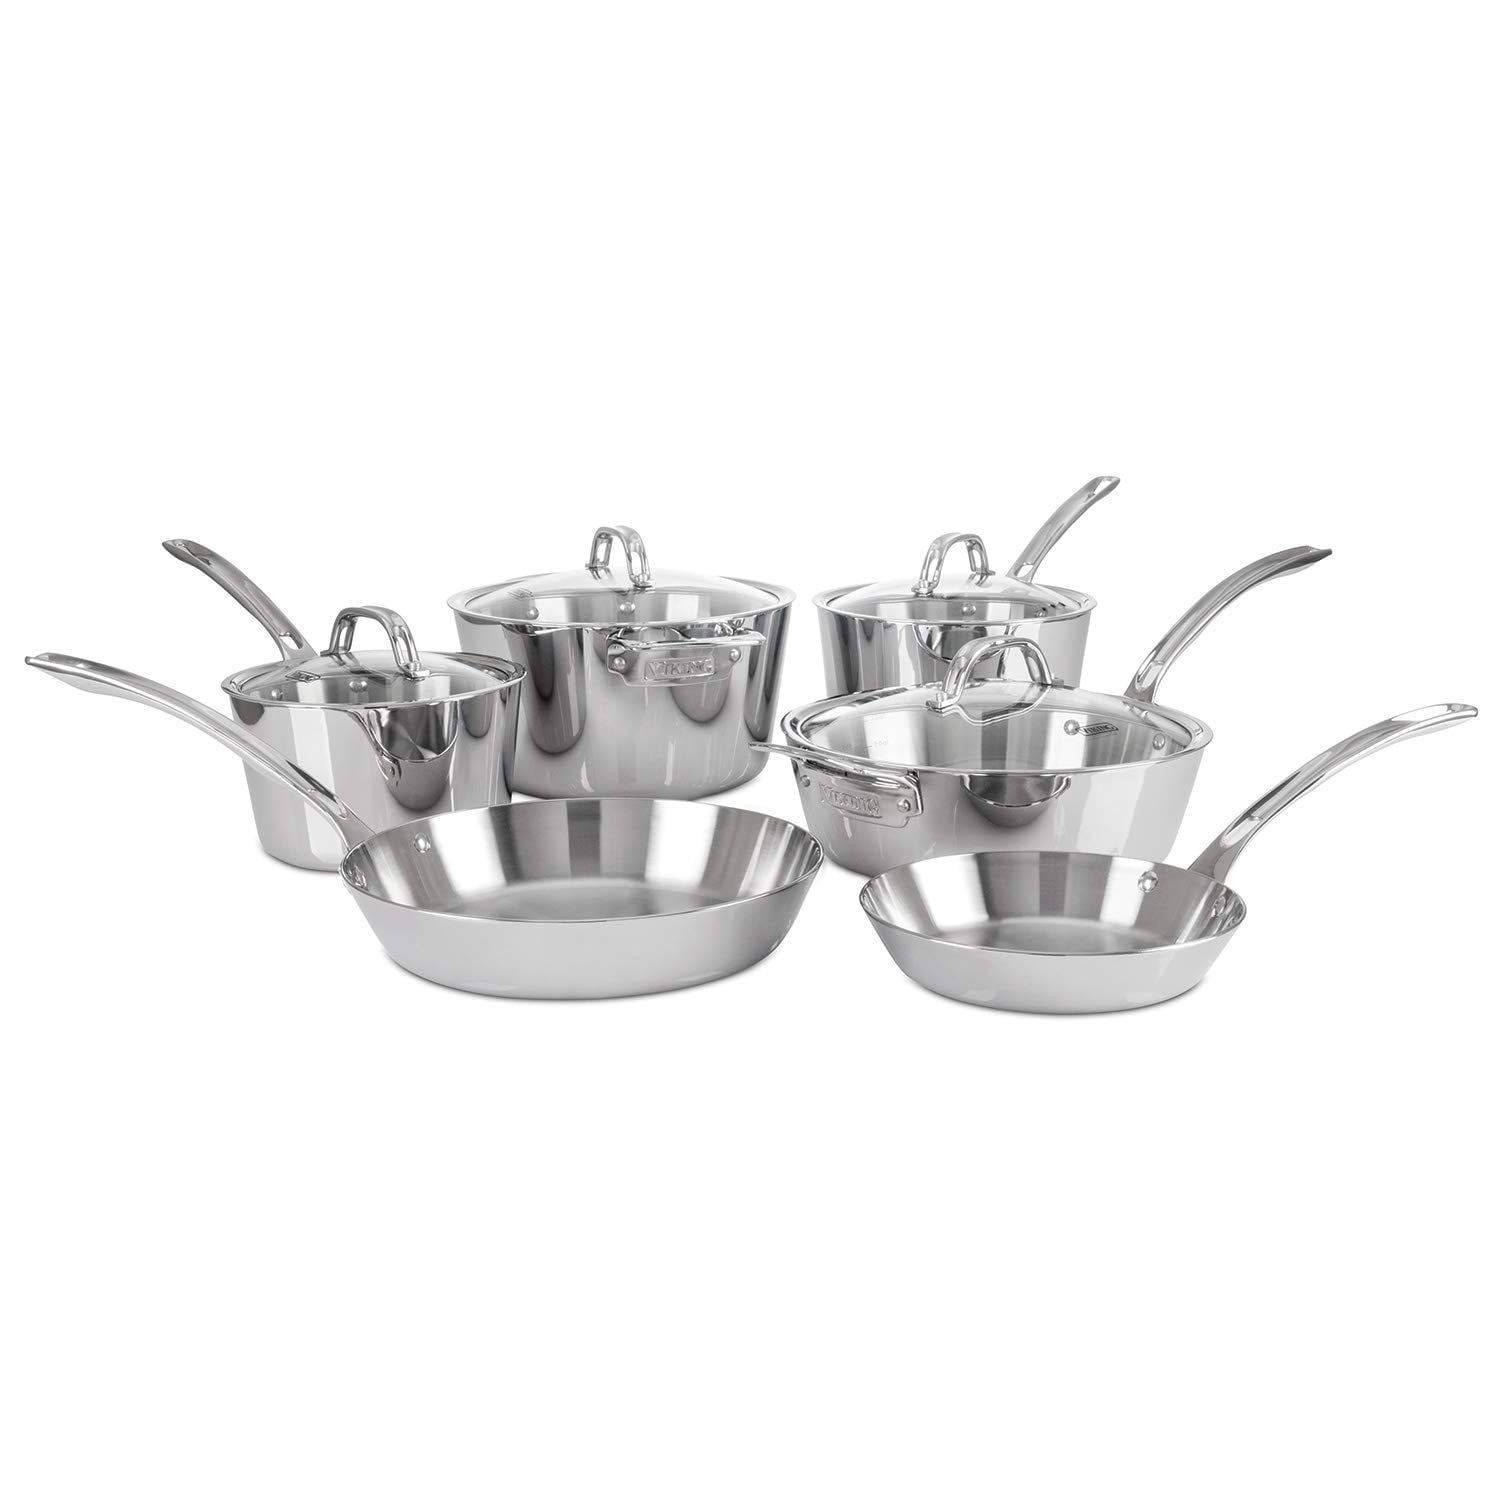 https://ak1.ostkcdn.com/images/products/is/images/direct/fbd4a7b1ec71244e9b564f395b2aced33d6539c3/3-Ply-Stainless-Steel-Cookware-Set%2C-10-Piece%2C-Dishwasher%2C-Oven-Safe%2C-Works-on-All-Cooktops-including-Induction%2CSilver.jpg